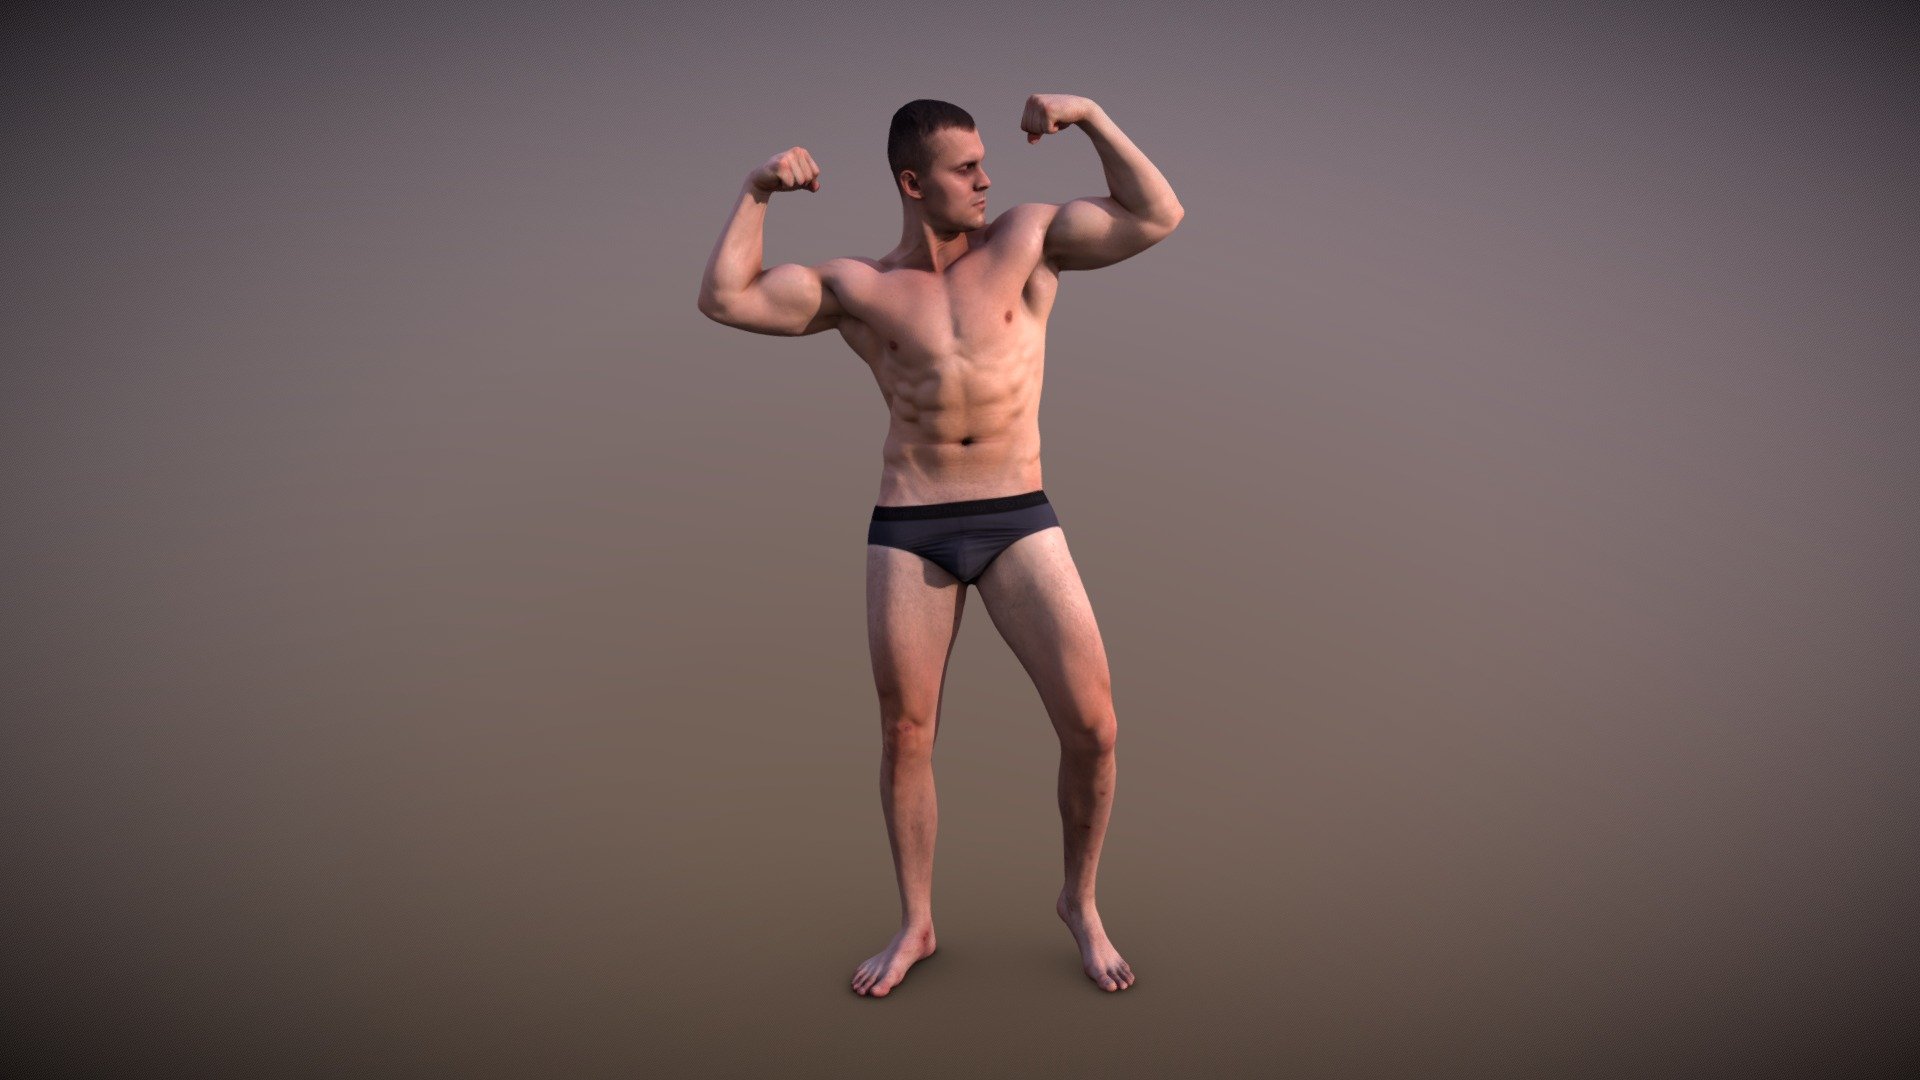 IVAN T9 body scan nice body shape.

if you want to make a special  3d scan souvenir. come to my 3dscan studio 3d model